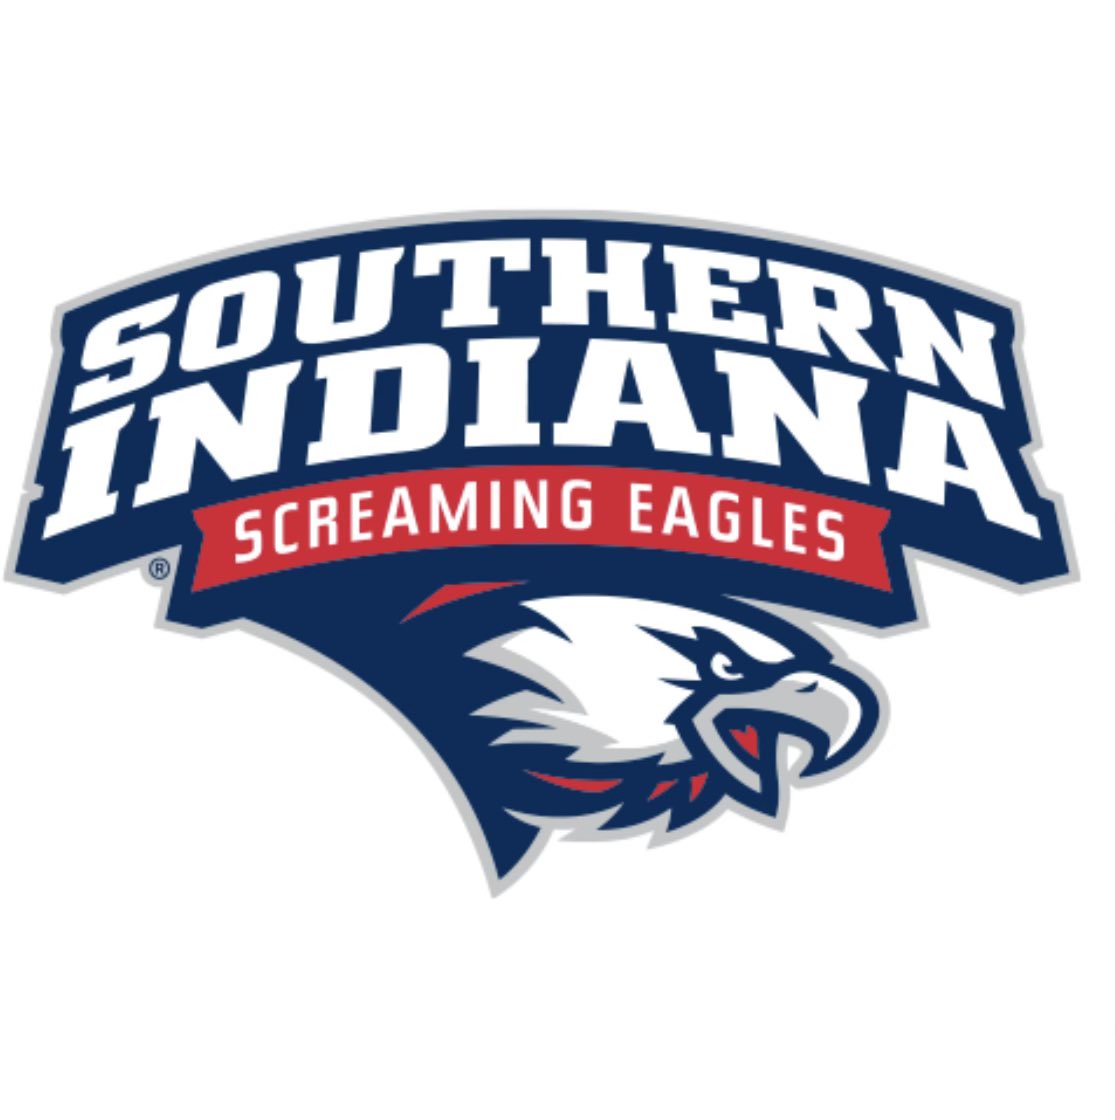 After talking to @coachspru I am blessed to receive an offer from Southern Indiana University.